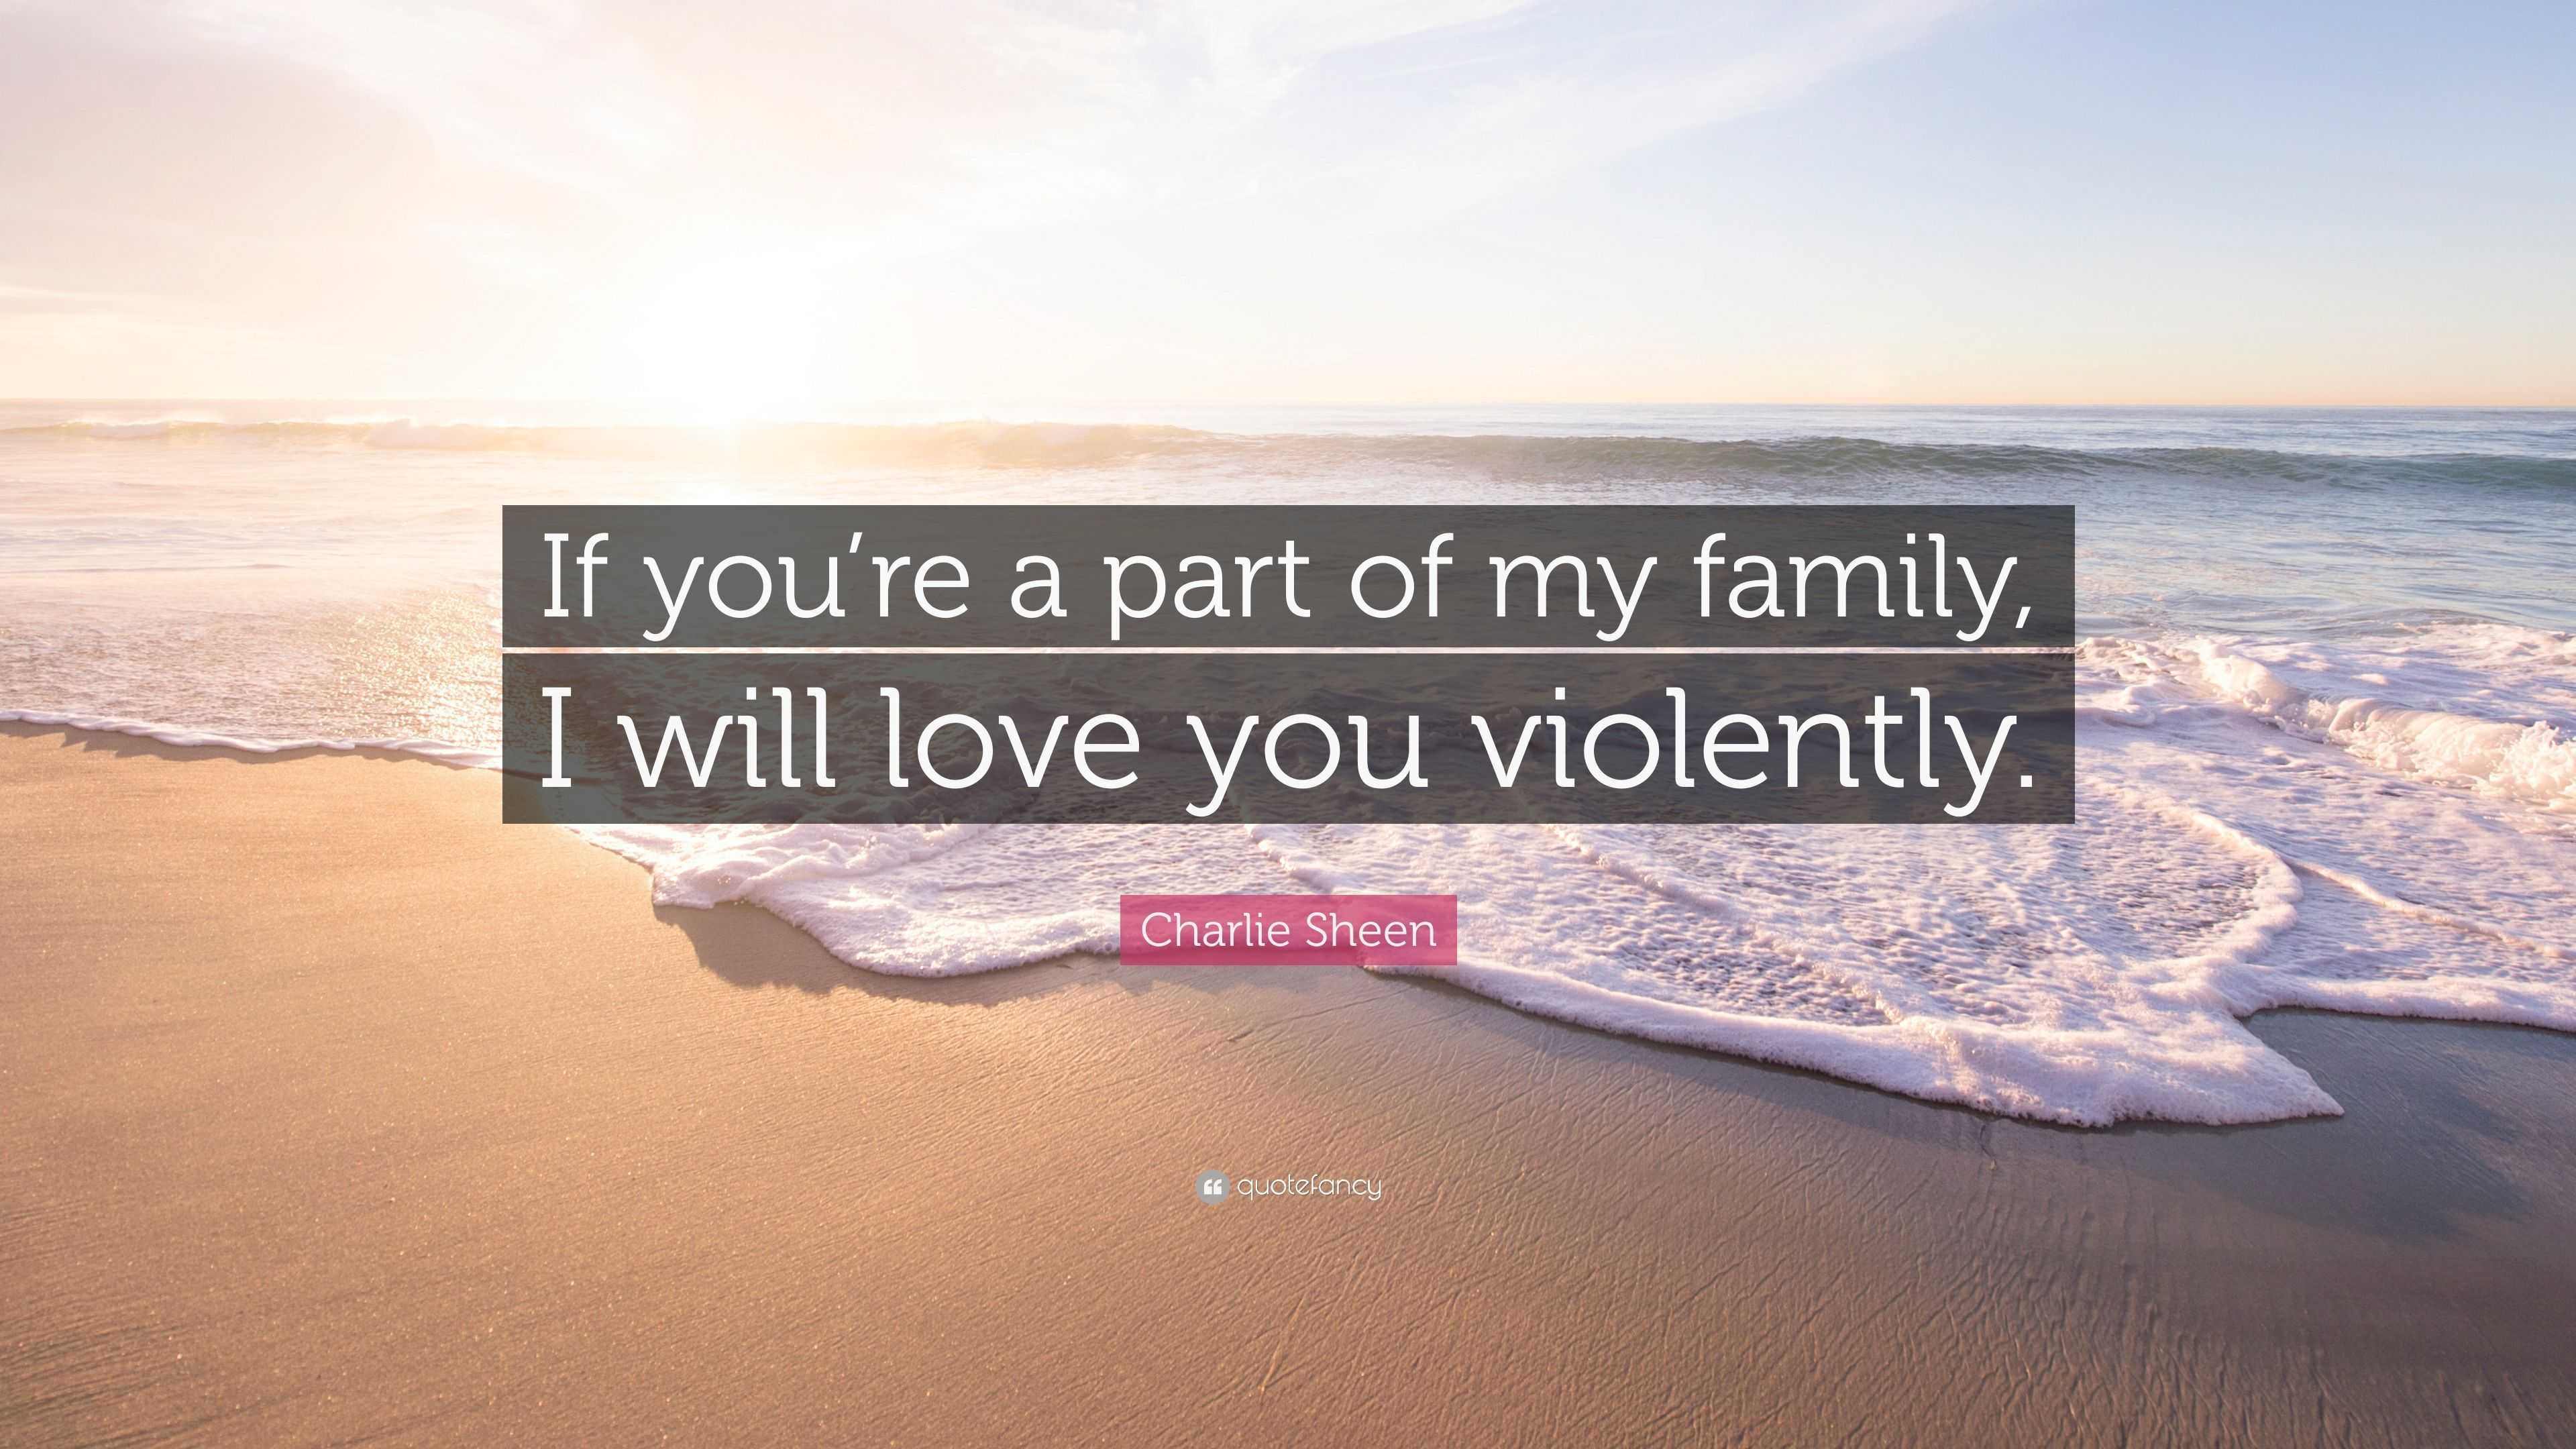 Charlie Sheen Quote: “If you're a part of my family, I will love you  violently.”